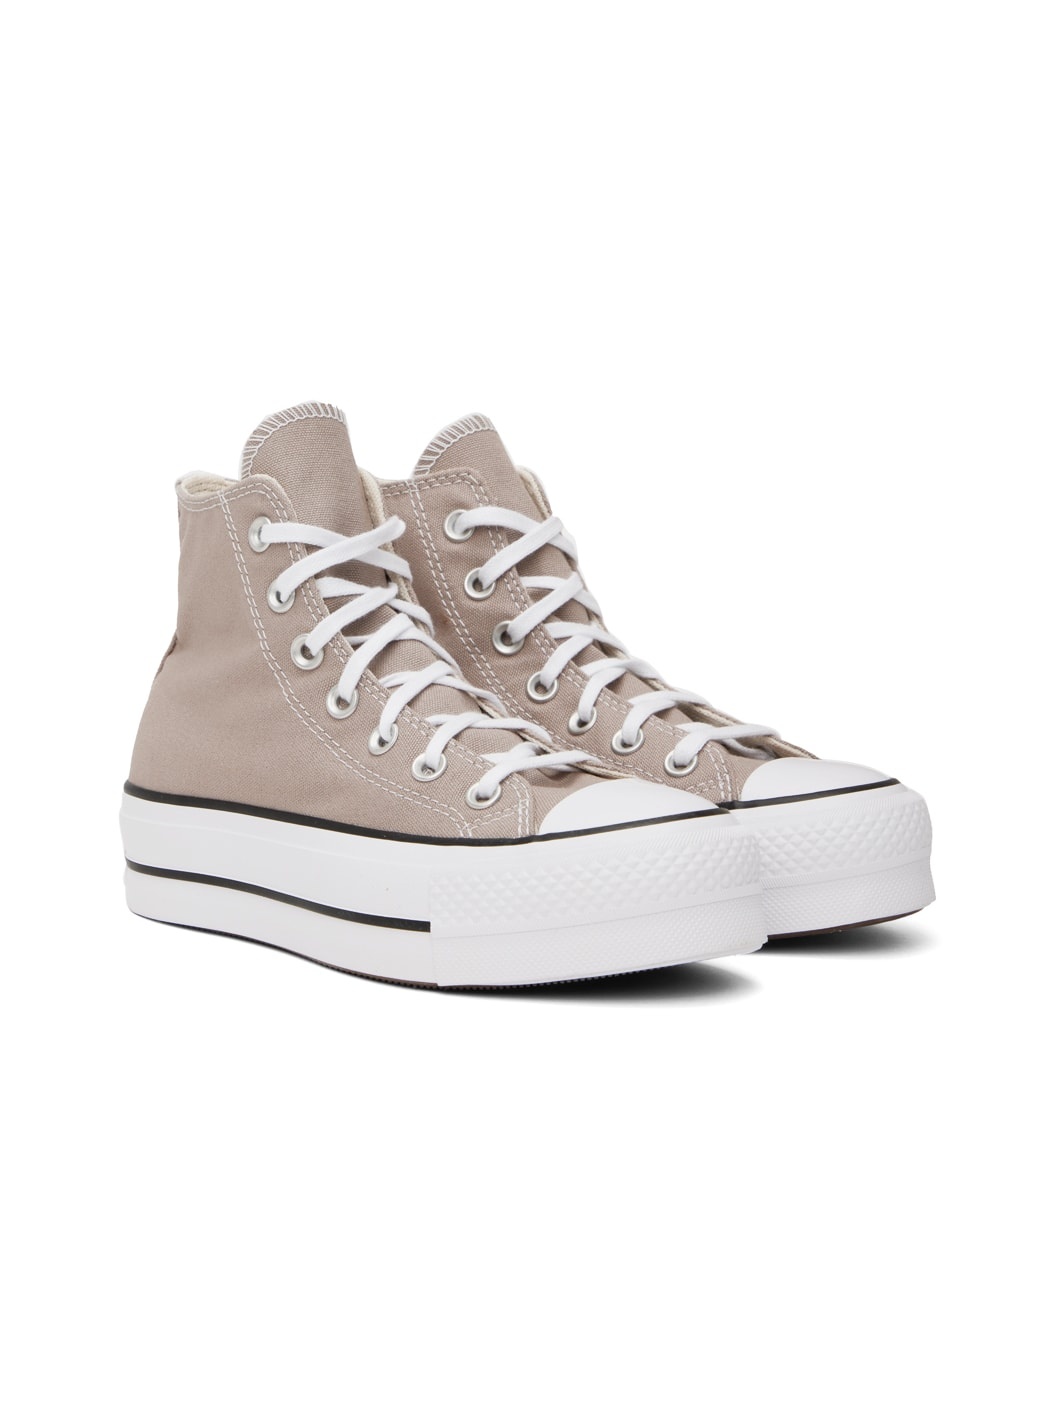 Taupe Chuck Taylor All Star Lift Platform High Top Sneakers - 4